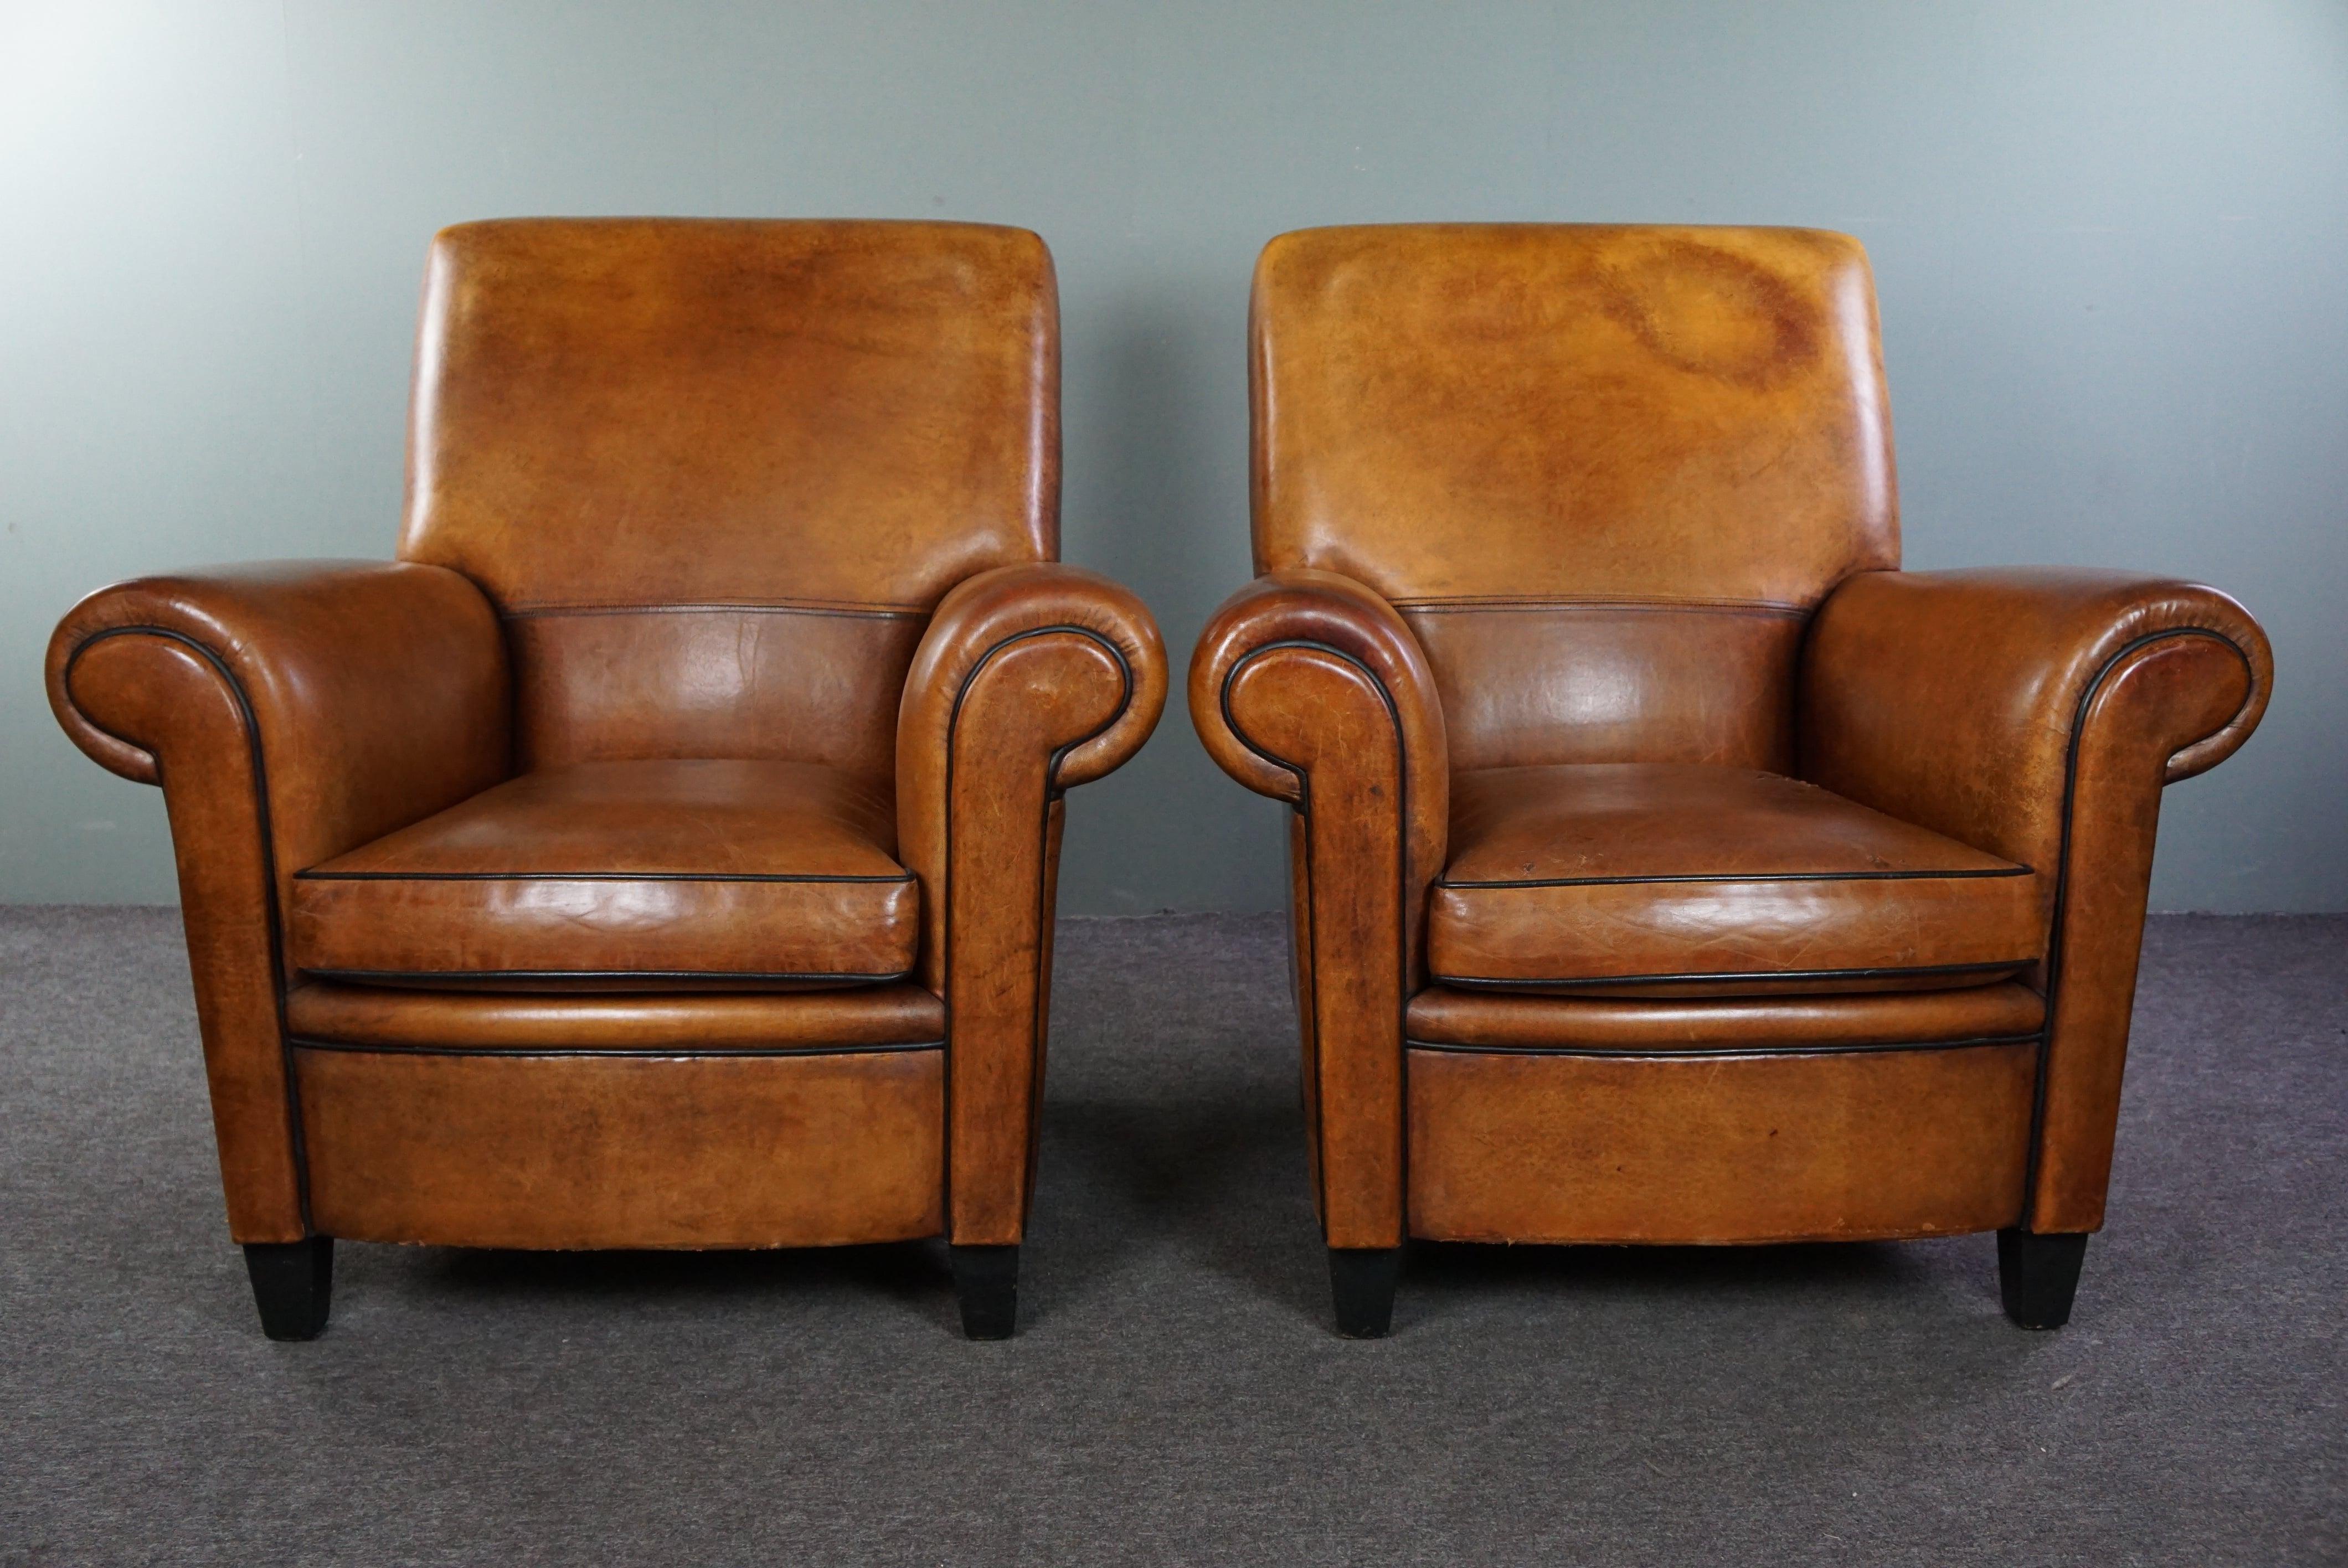 Offered is this fine set of two large and comfortable sheep leather armchairs.

For those looking for a beautiful set of sheep leather armchairs with a beautiful patina and comfortable seating, this is a good opportunity.
The armchairs have acquired